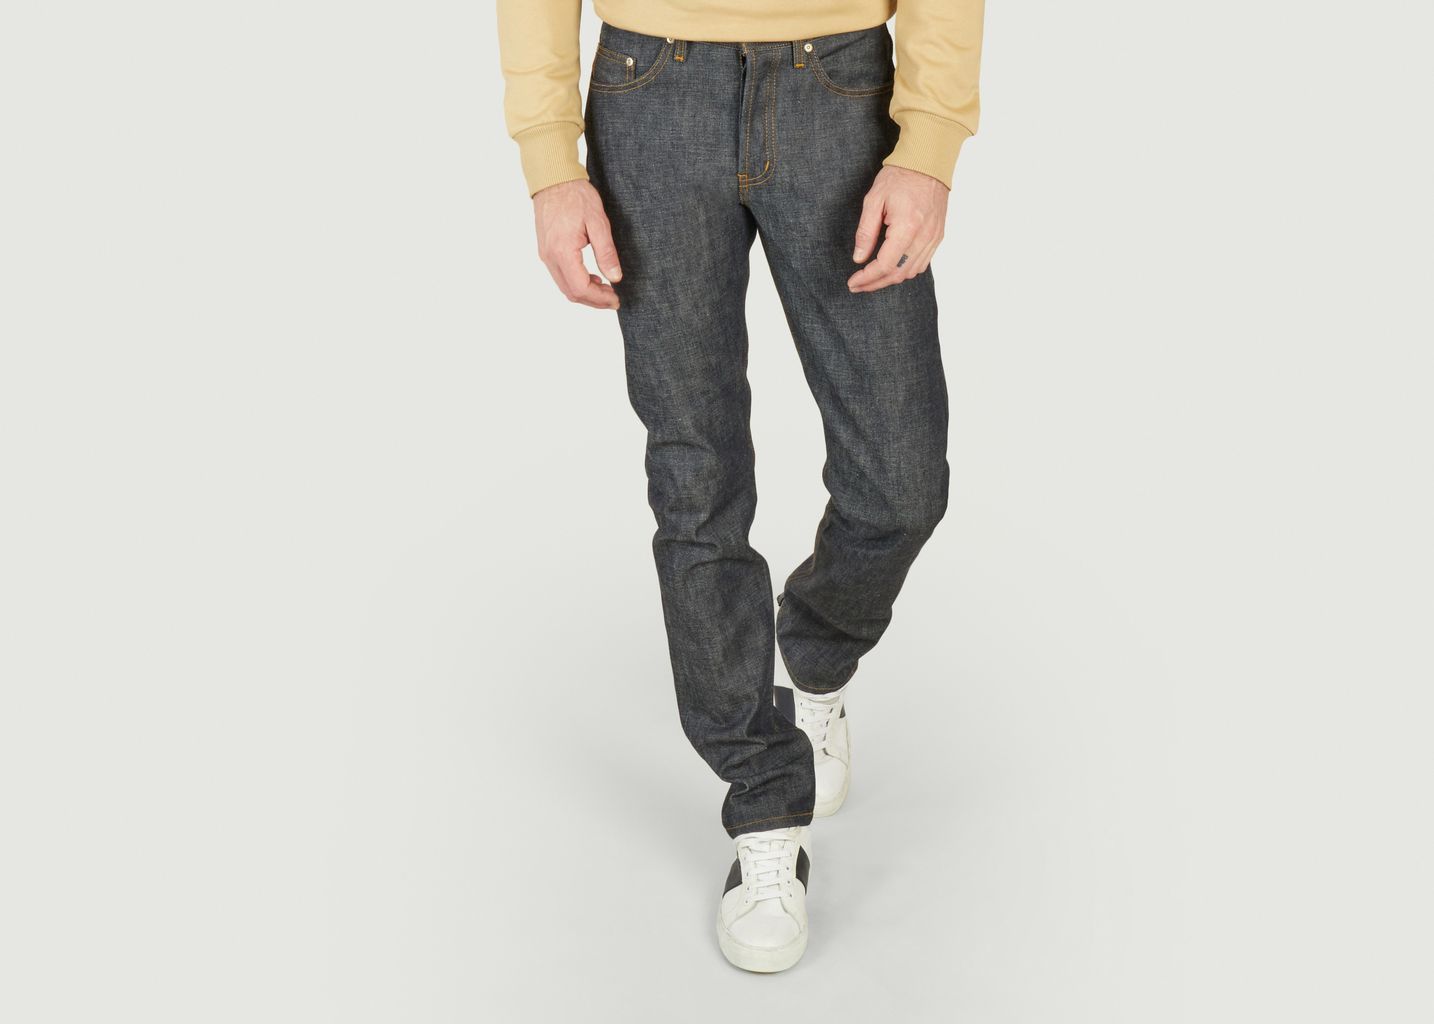 Tried & True Selvedge Jeans True Guy - Naked and Famous